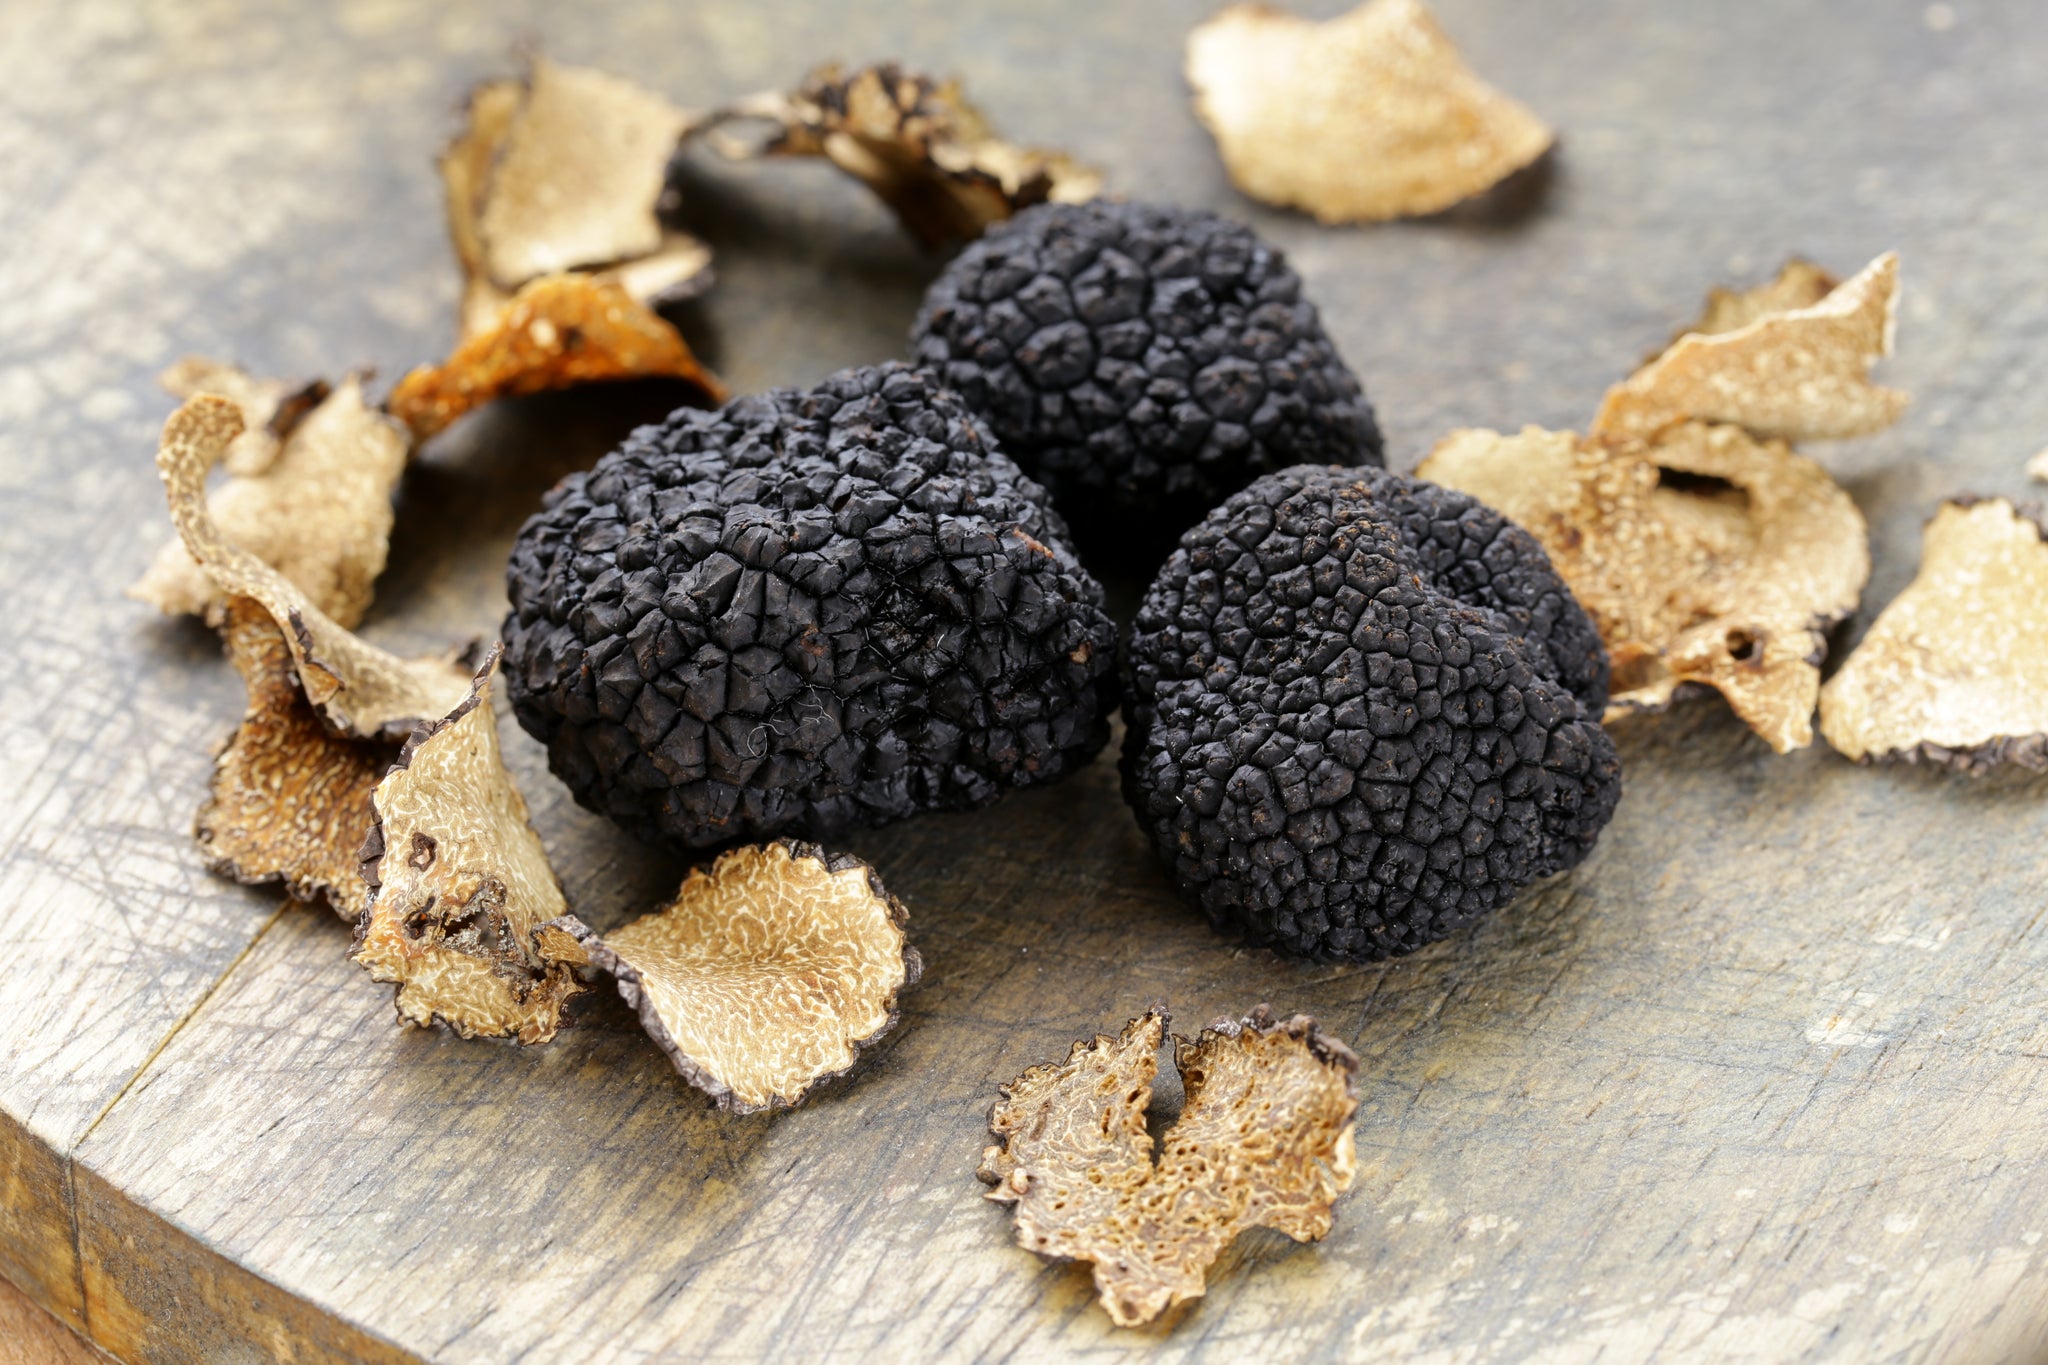 Truffle lovers, it’s time to treat yourself